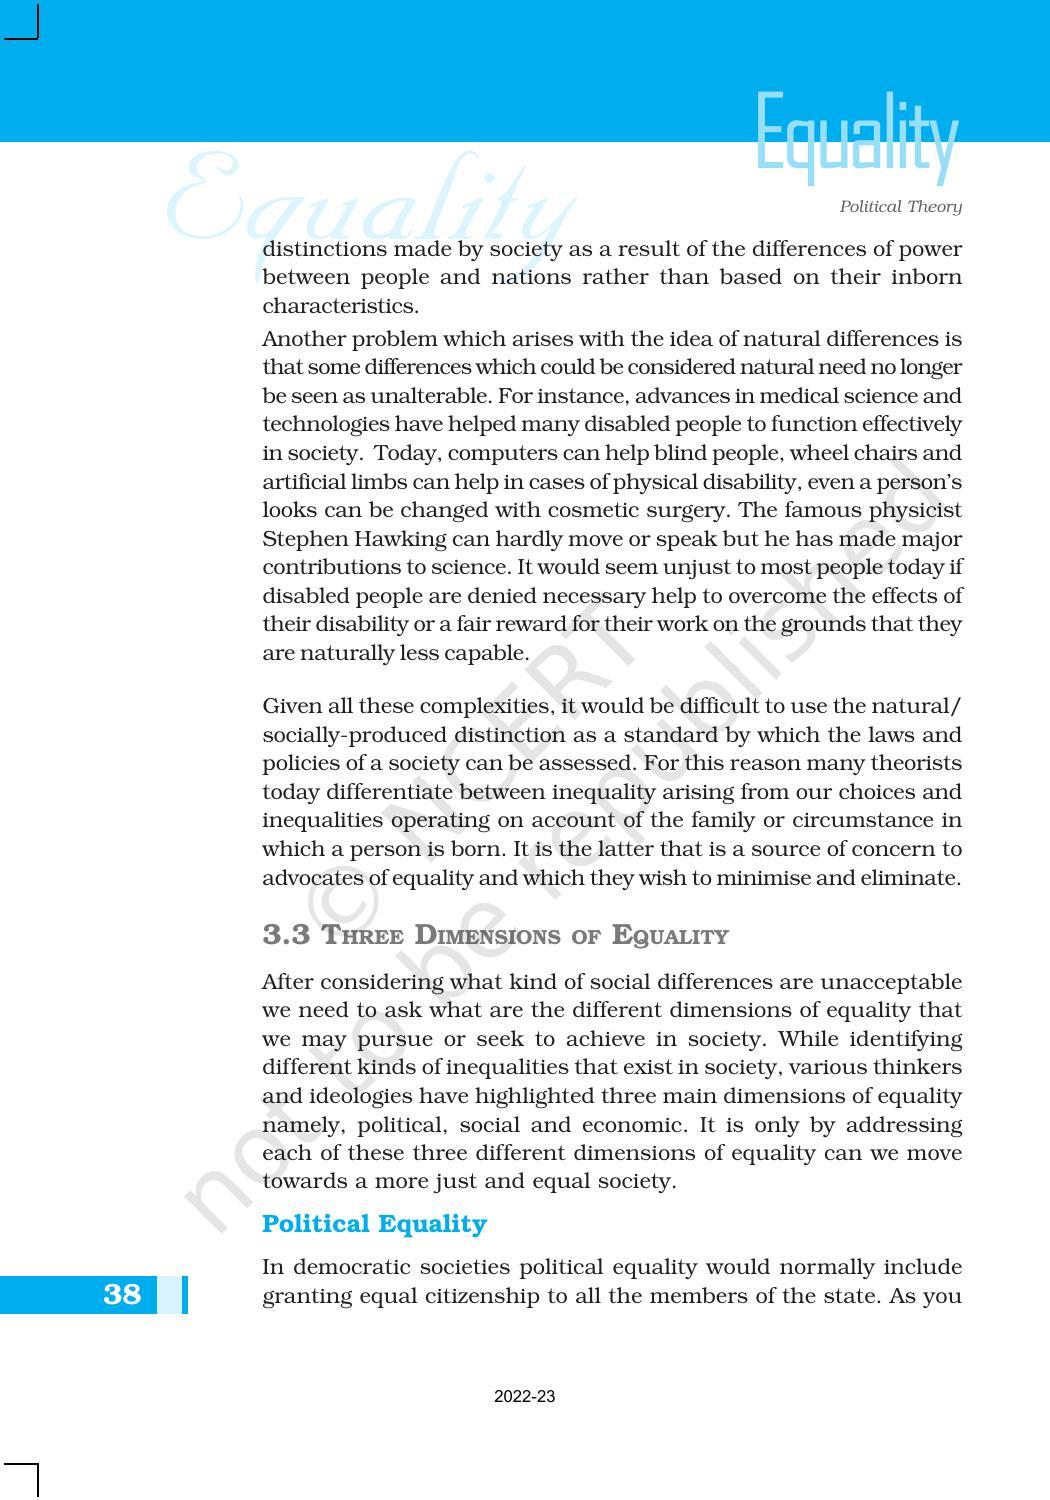 NCERT Book for Class 11 Political Science (Political Theory) Chapter 3 Equality - Page 8